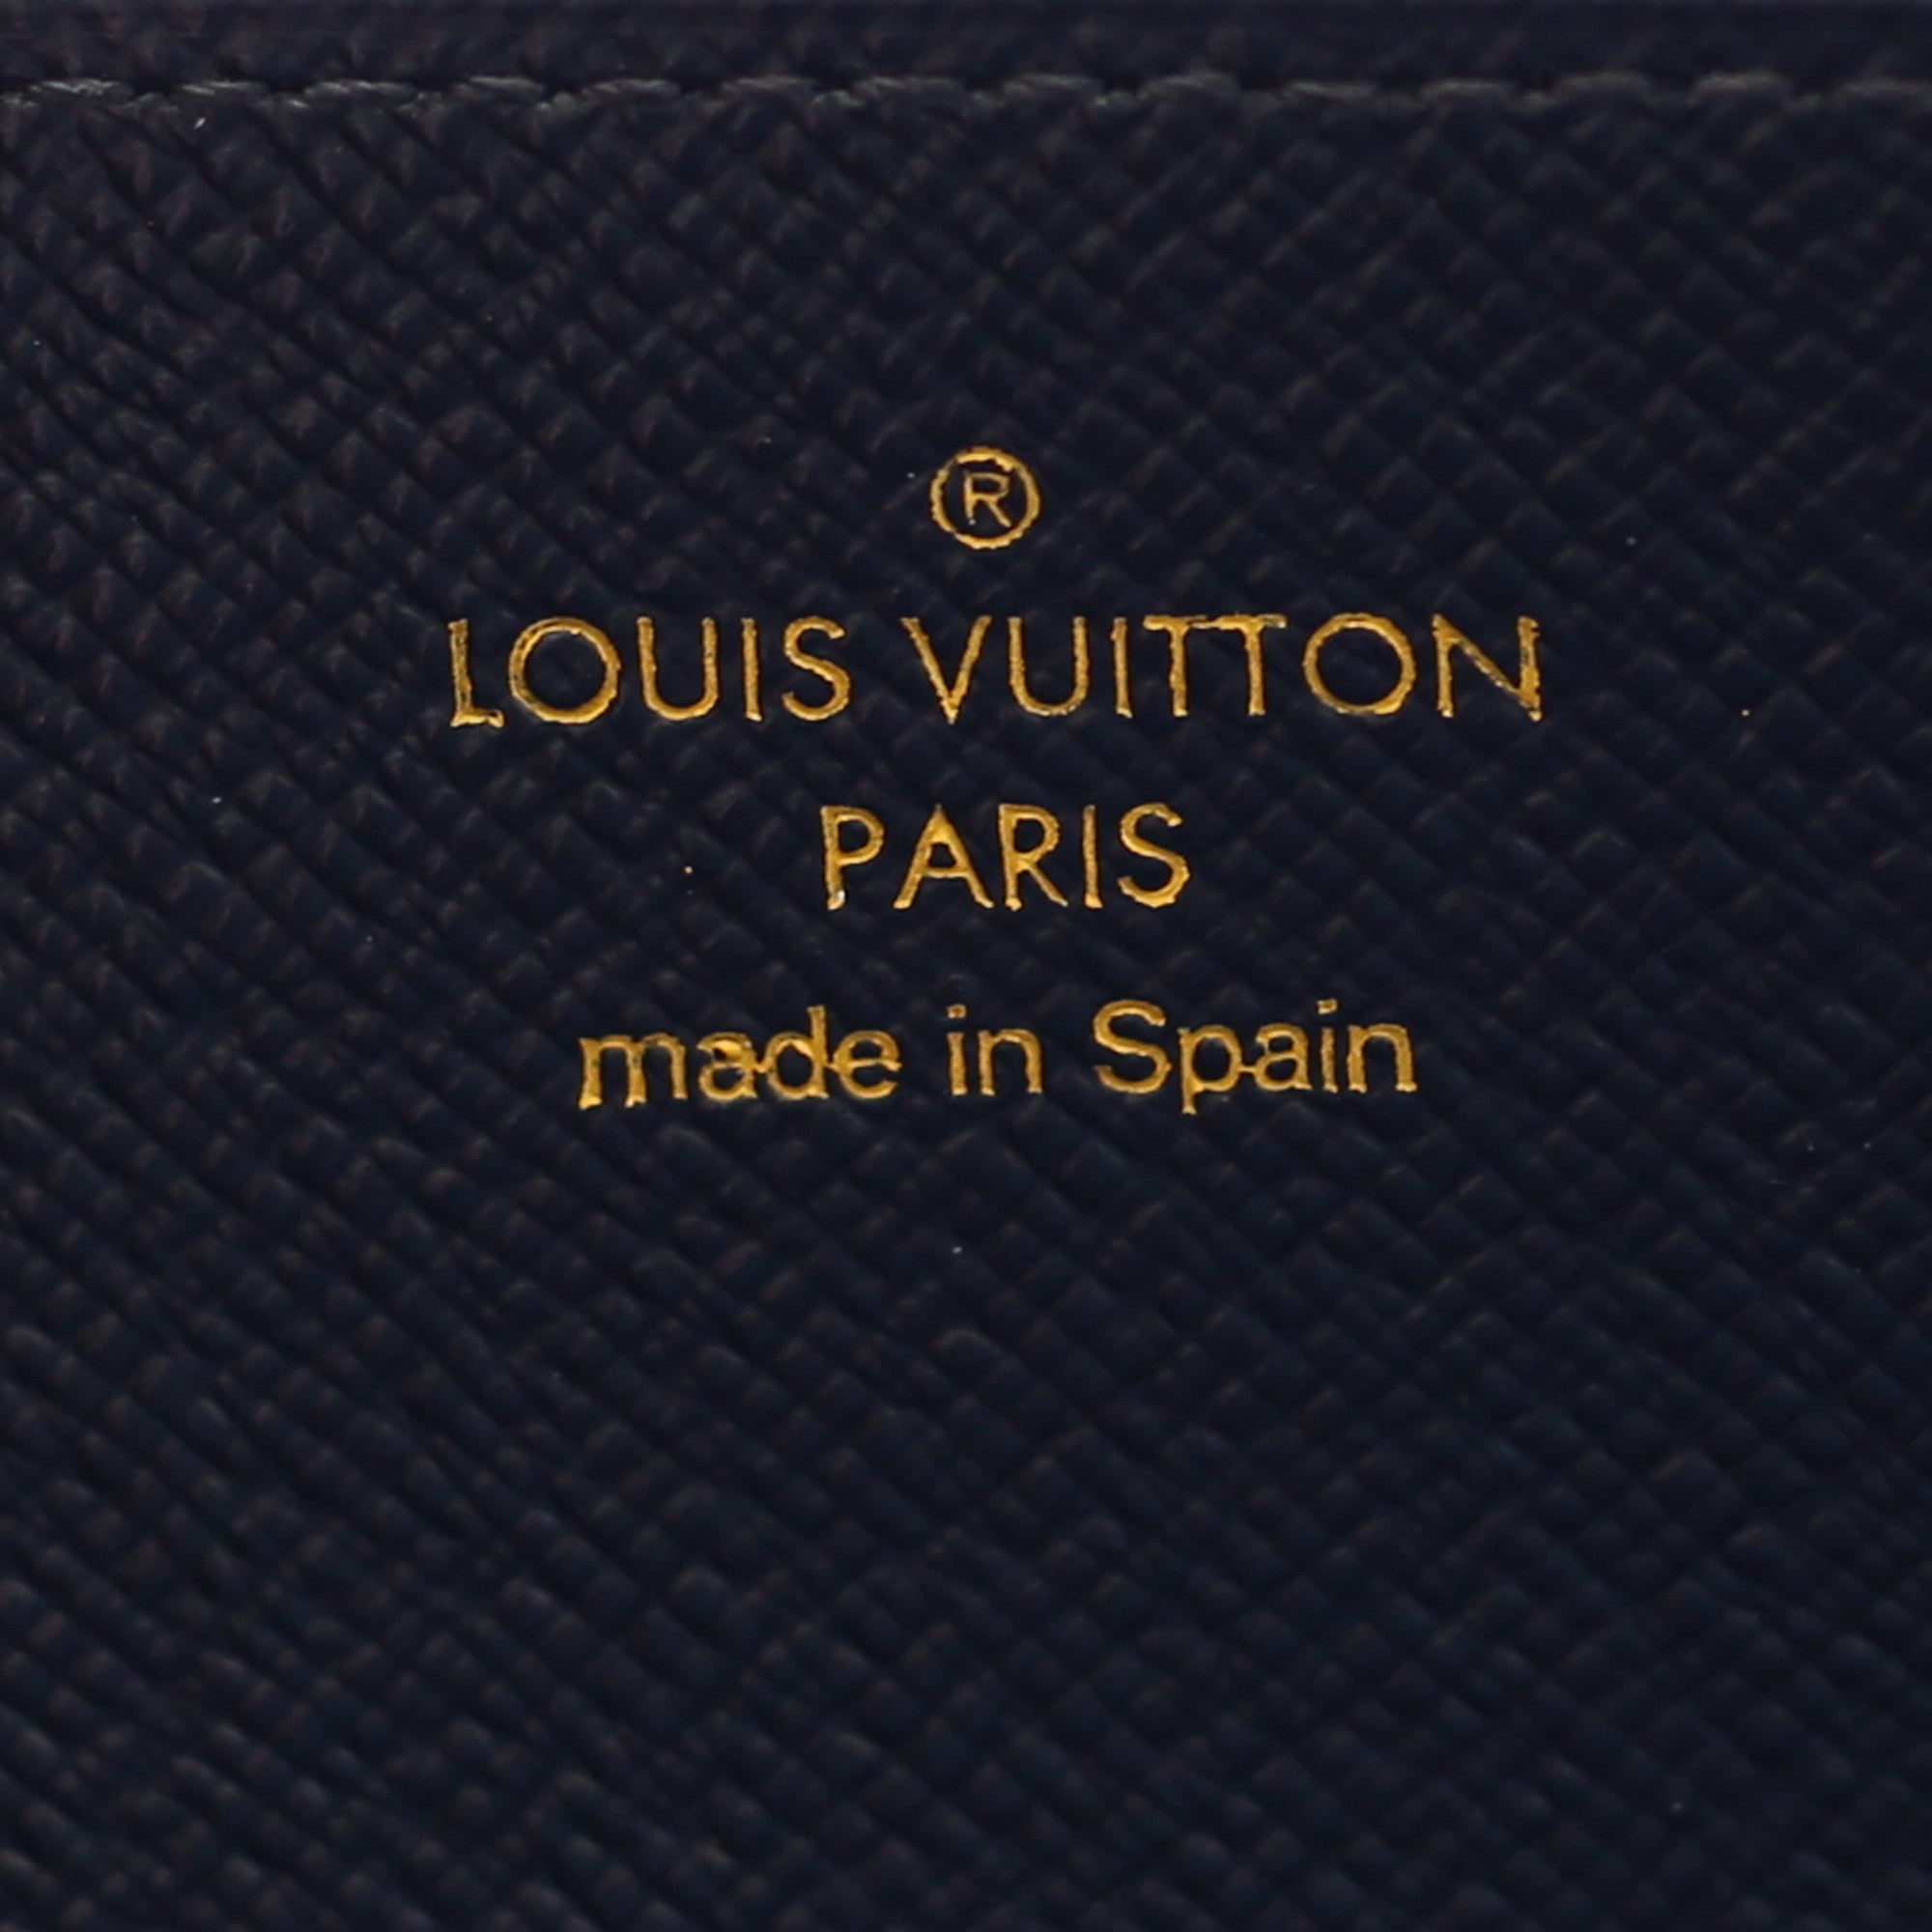 Louis Vuitton Chain Wallet Limited Edition Supreme Epi Leather Red